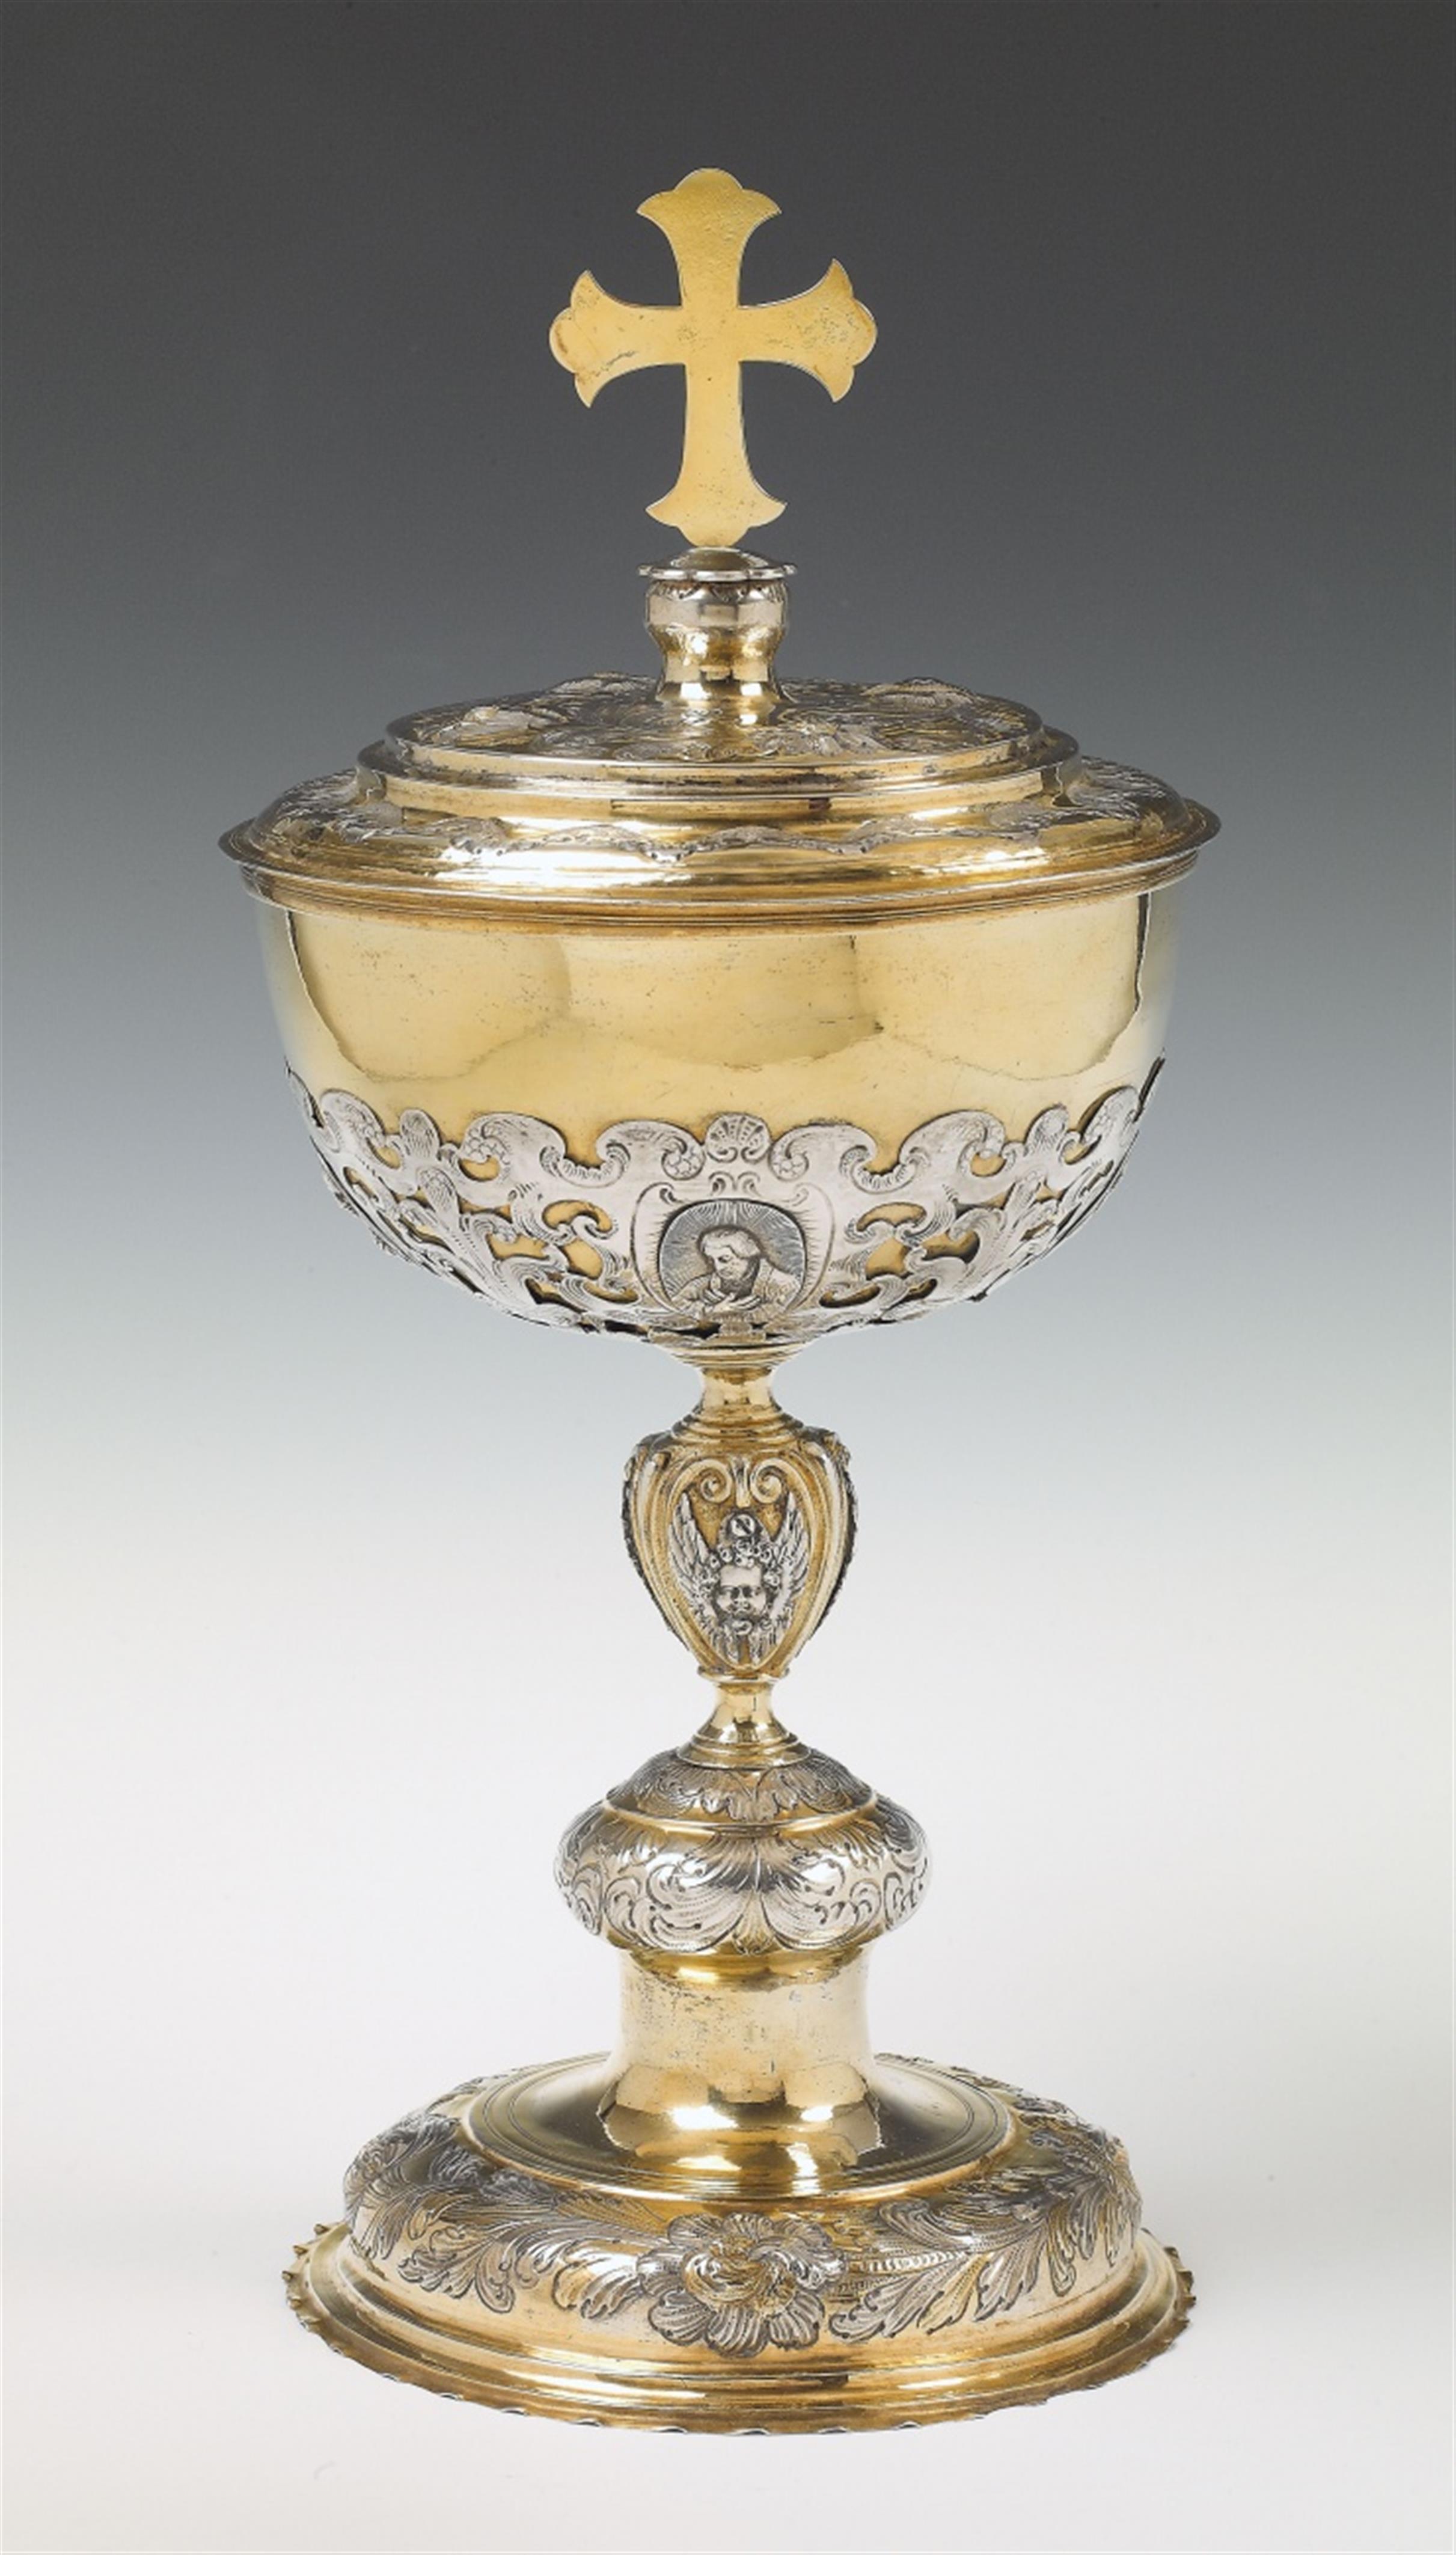 A large Augsburg partially gilt silver ciborium. Decorated with oval reliefs containing busts of counter-reformation saints. Marks of Johann Jakob I Ernst, ca. 1680. - image-1